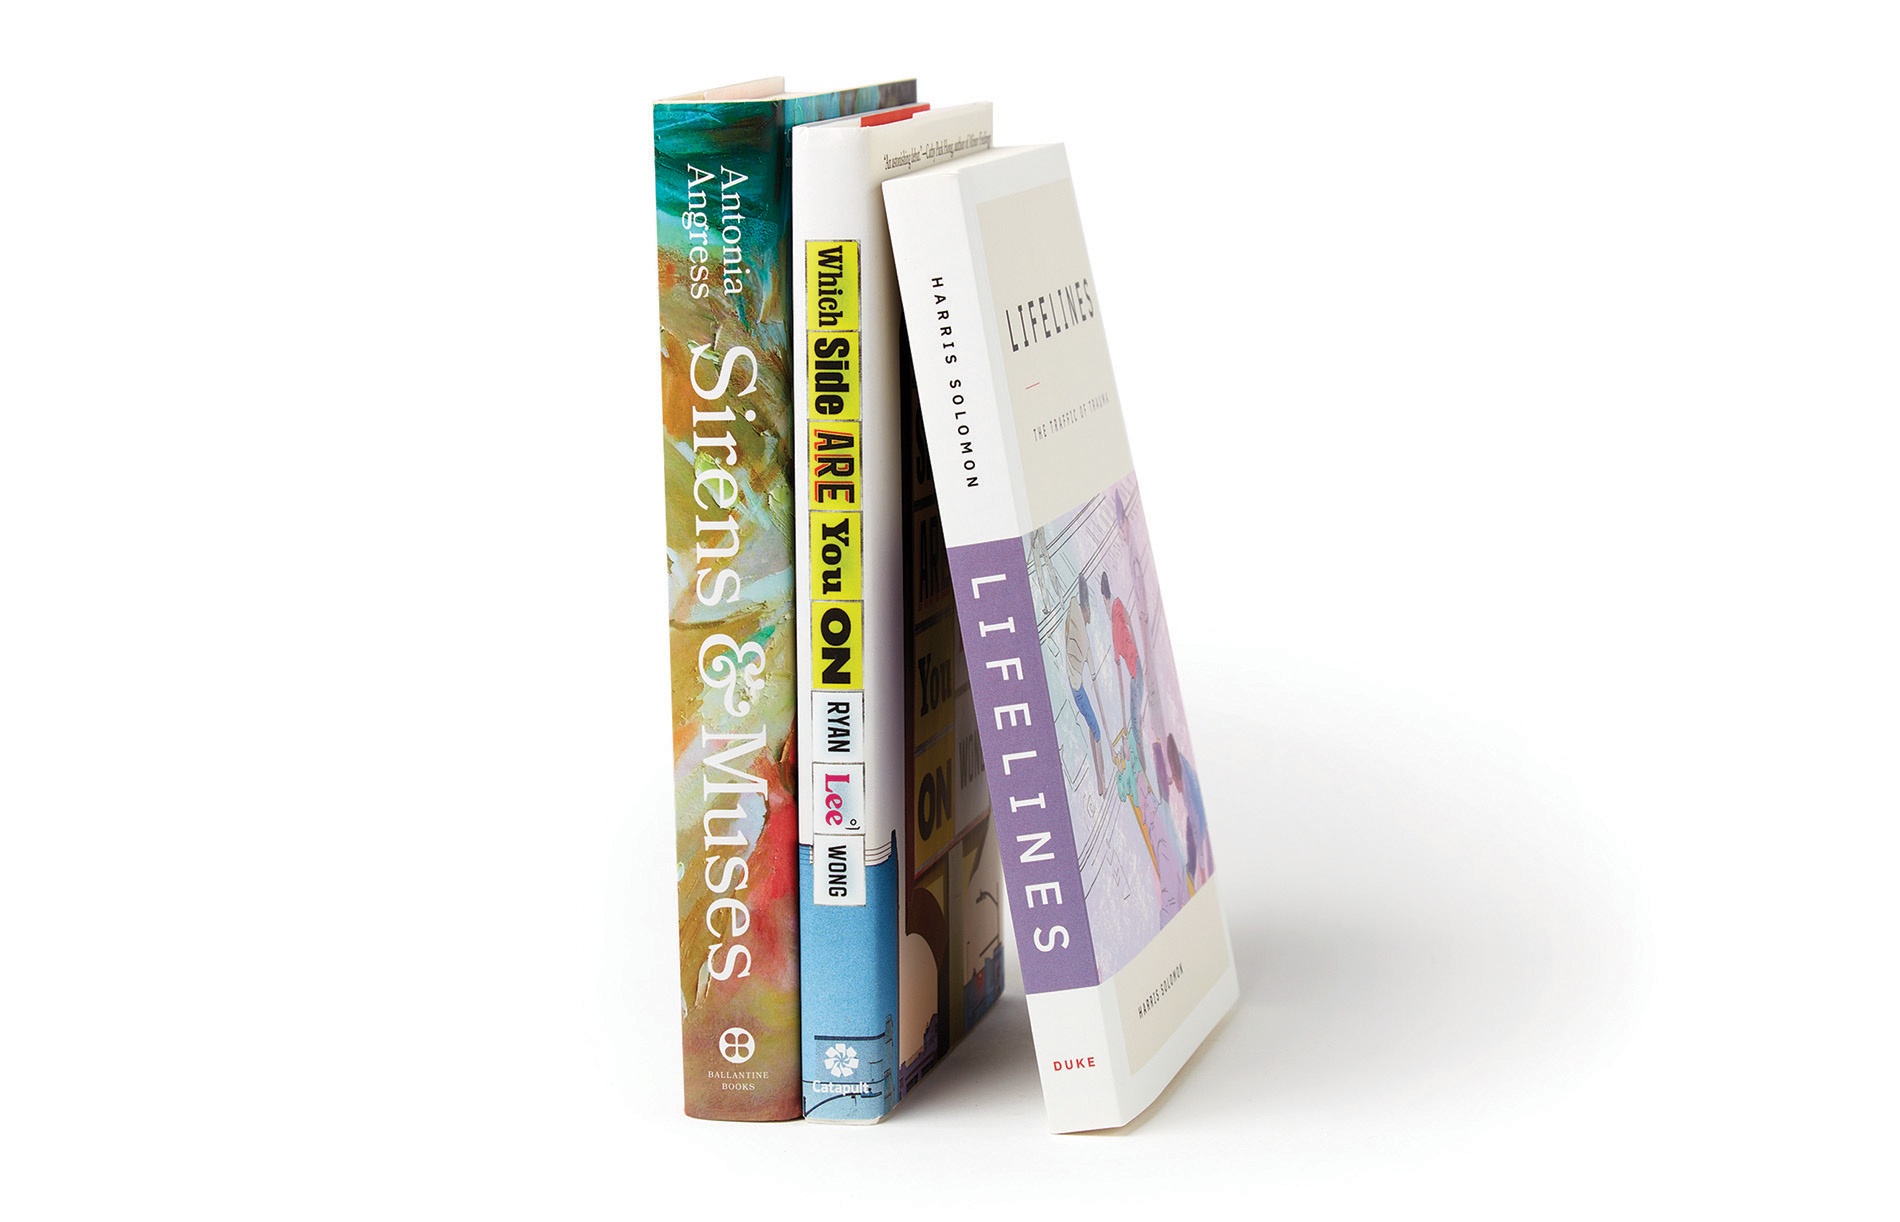 An image of book spines by Antonia Angress ’13, Ryan Lee Wong ’10, and Harris Solomon ’07 AM, ’11 PhD